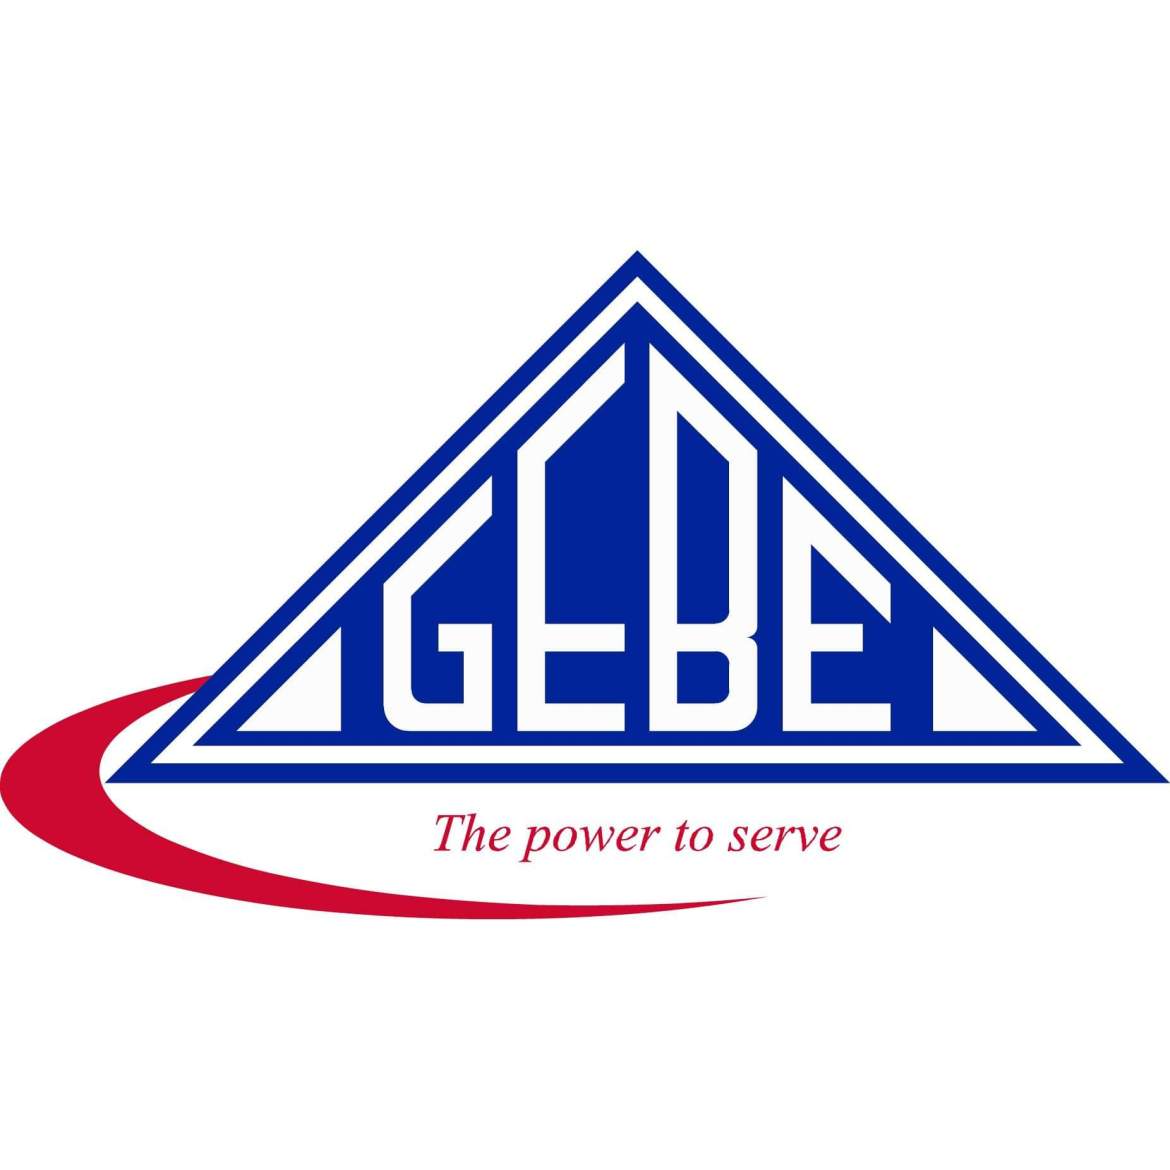 St Peters District GEBE New Power Outage 2am The Latest 